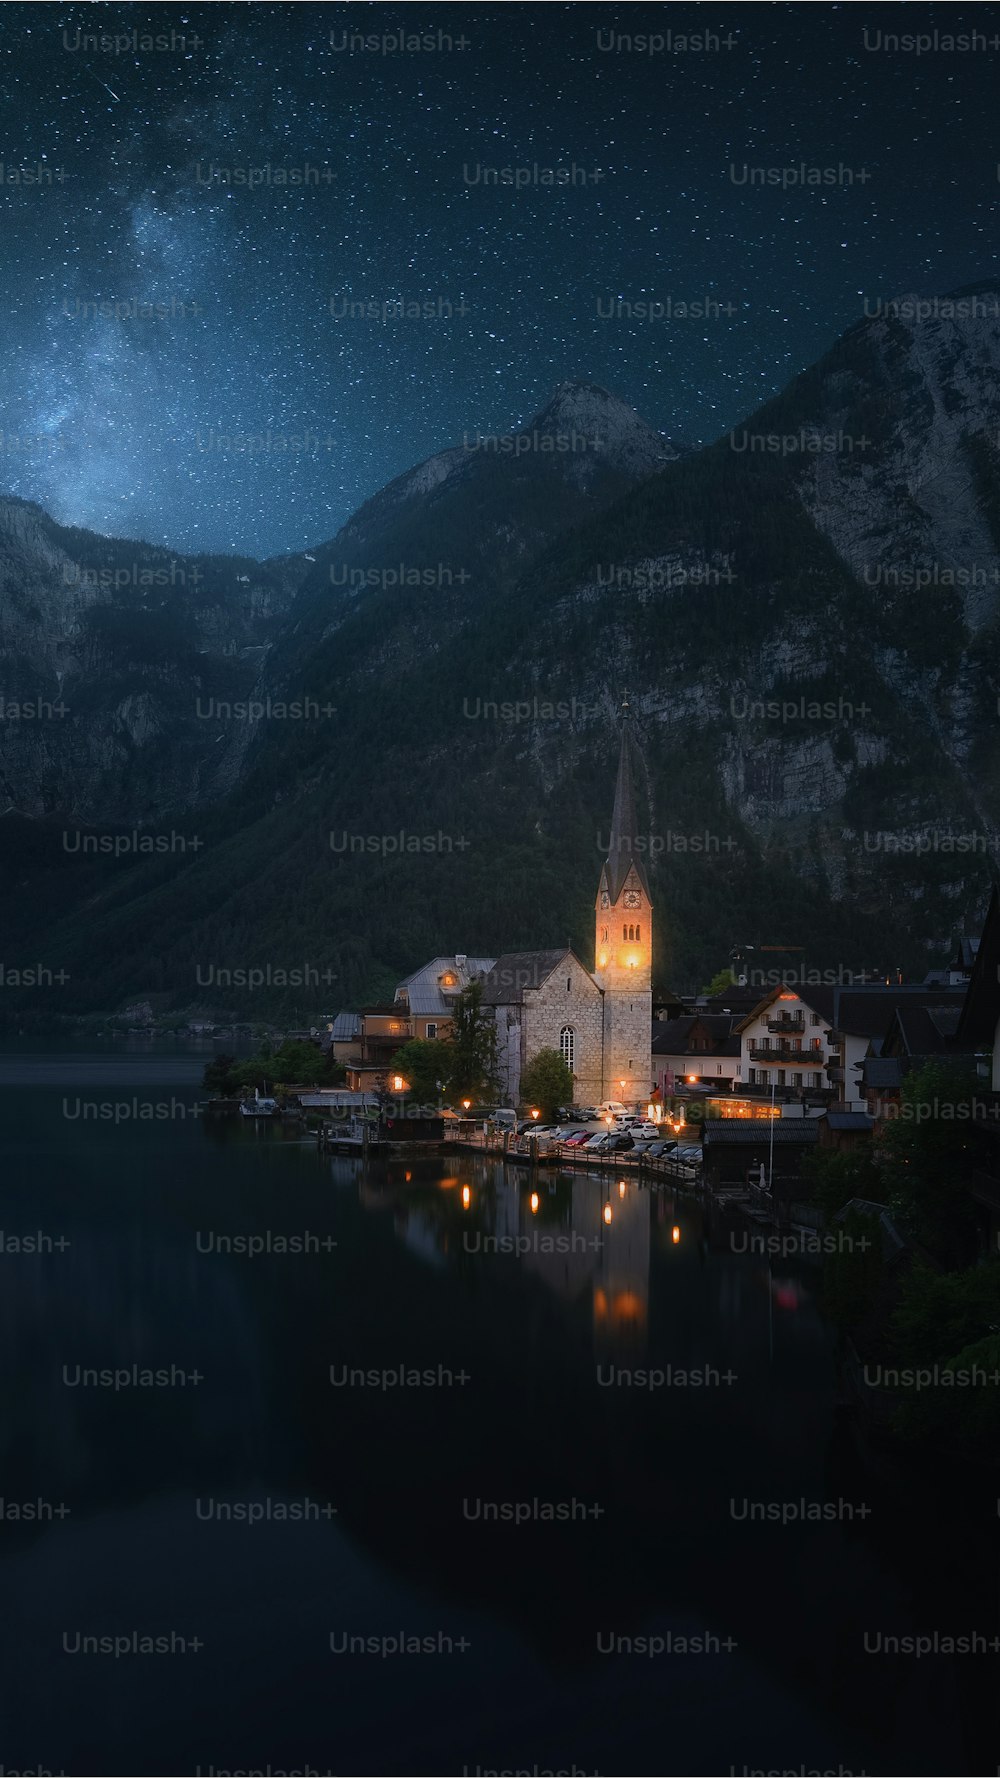 a night scene of a small town on a lake